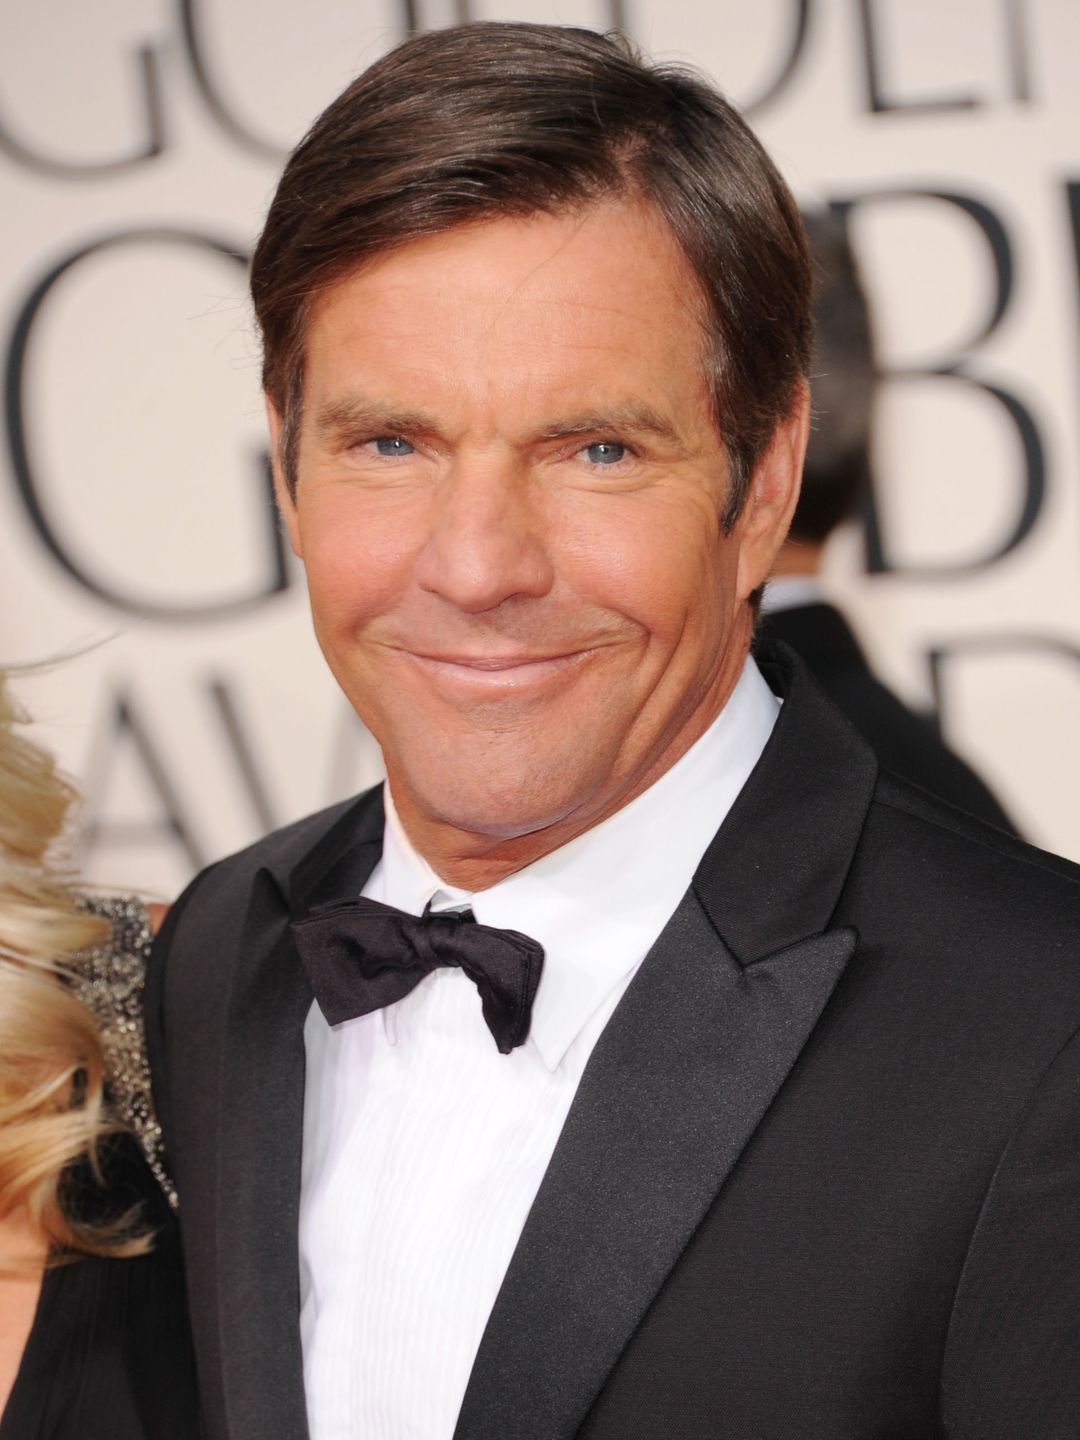 Dennis Quaid who is his father